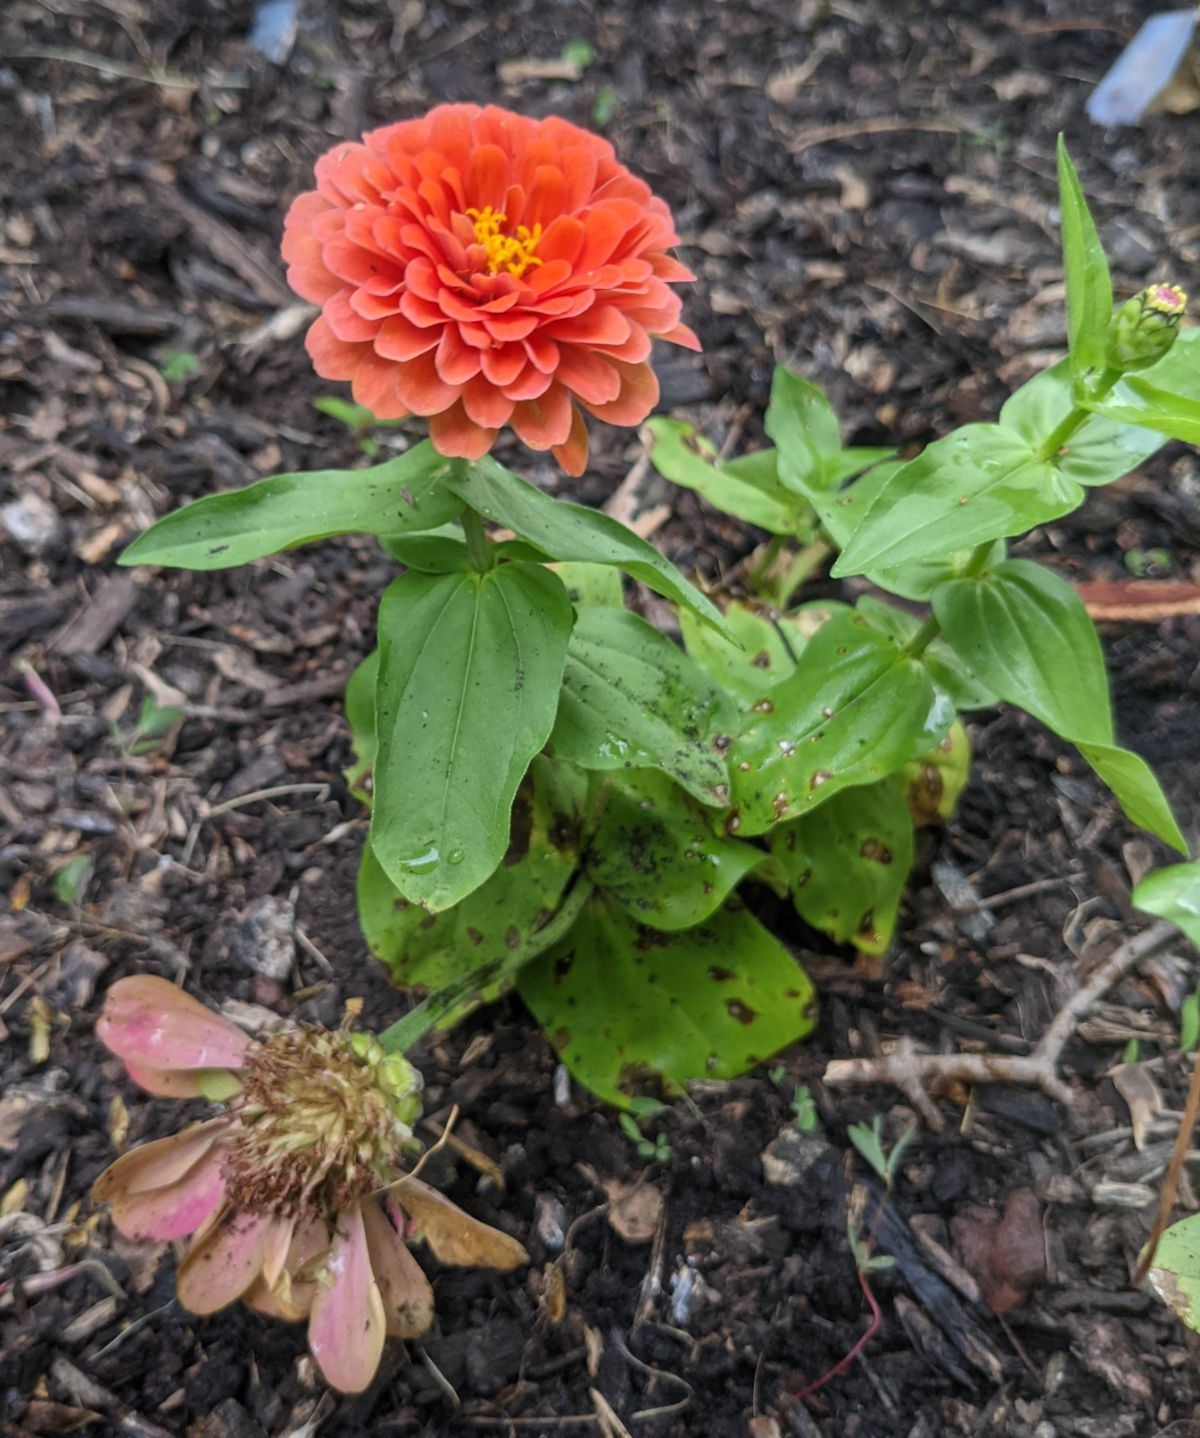 Coral zinnia in full double bloom and a spent, faded pink zinnia flower on the same plant